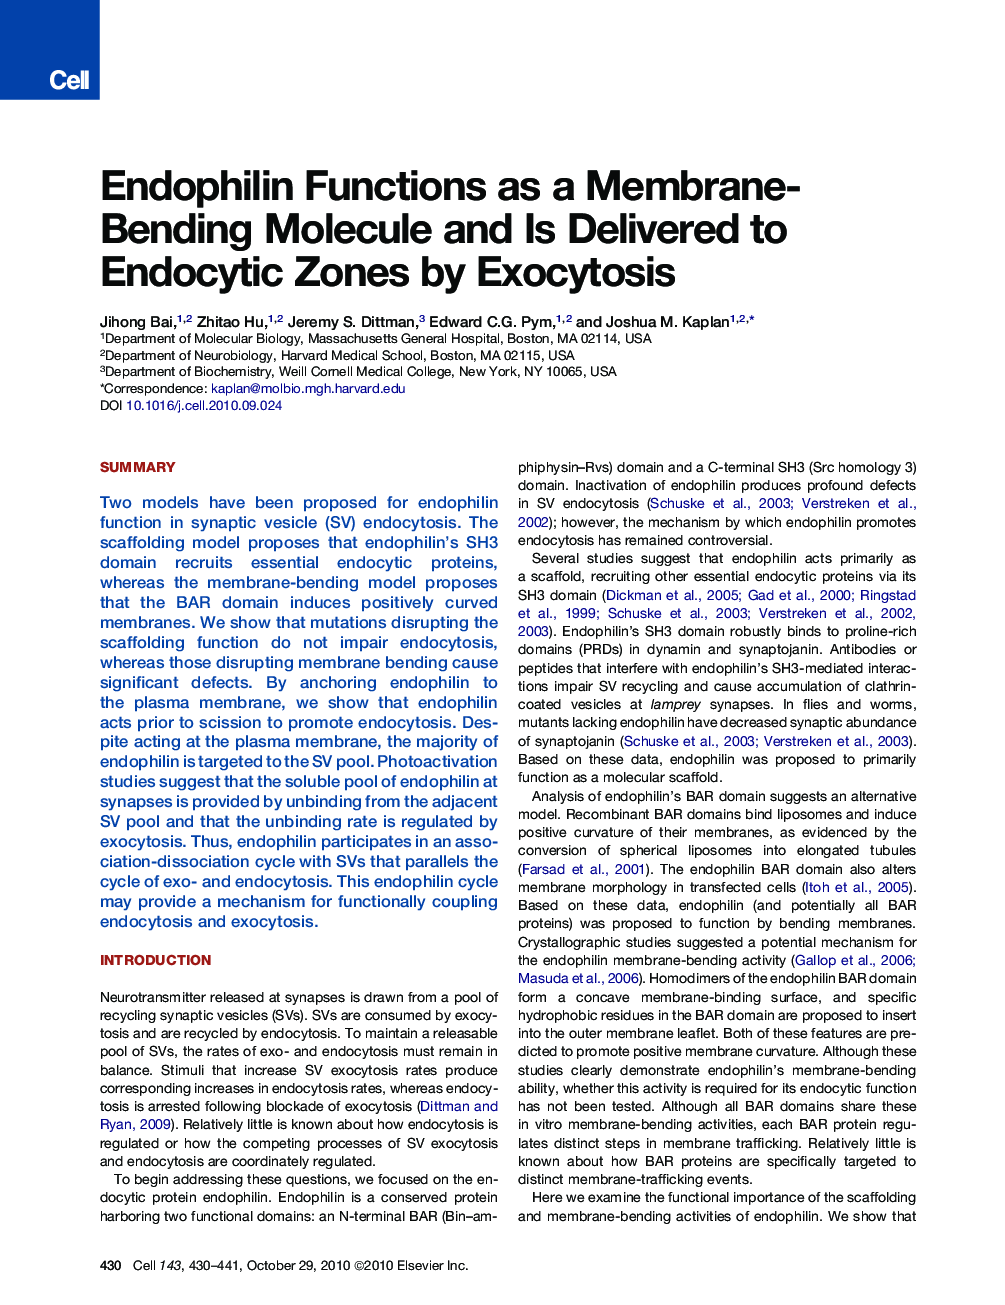 Endophilin Functions as a Membrane-Bending Molecule and Is Delivered to Endocytic Zones by Exocytosis